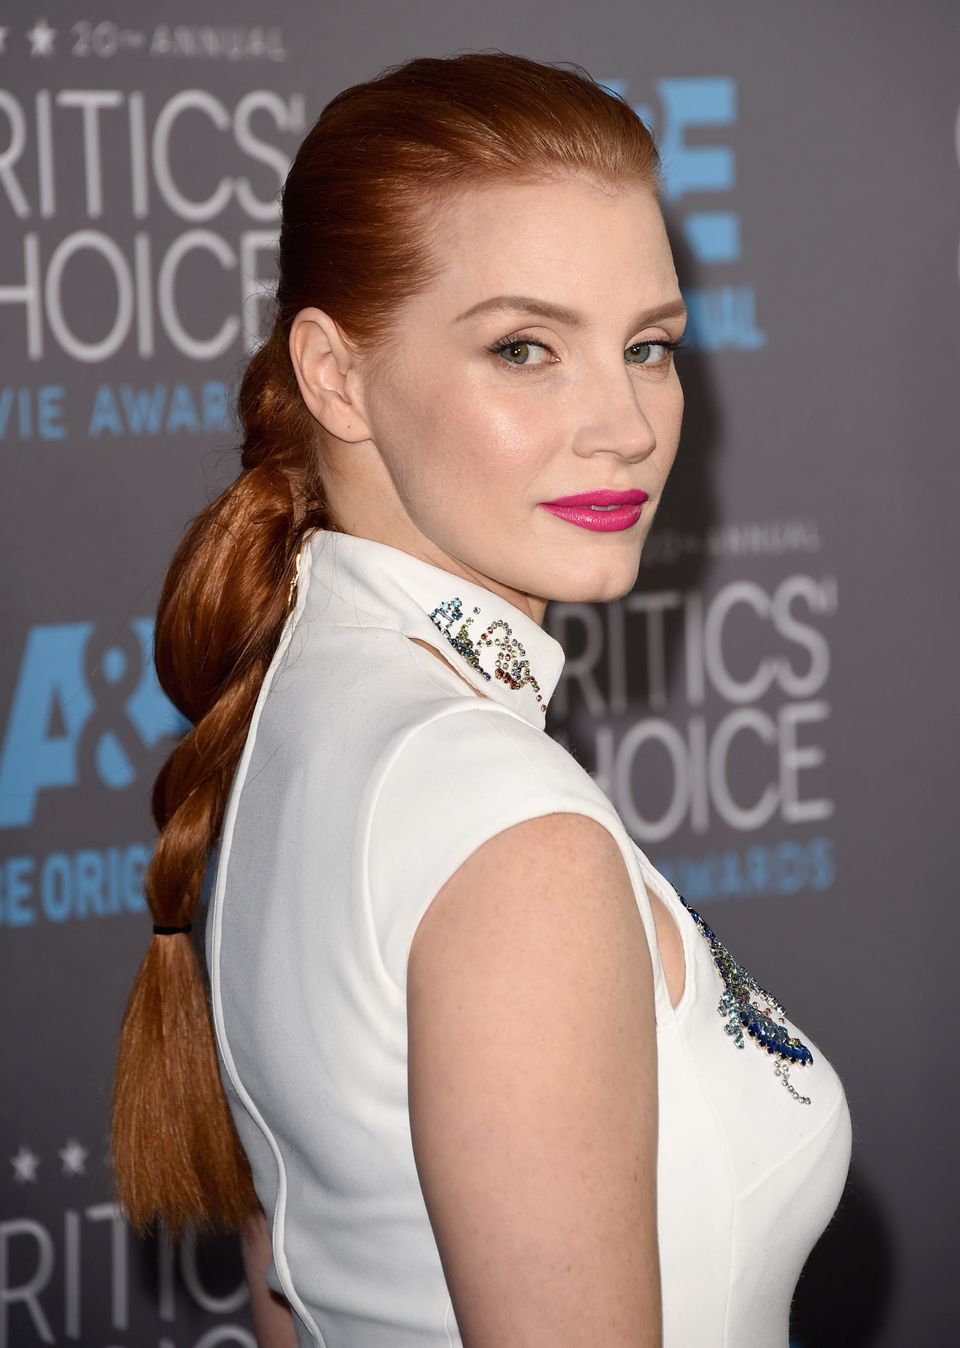 Jessica Breaks The Redhead Beauty Rules (And Looks | HuffPost Life